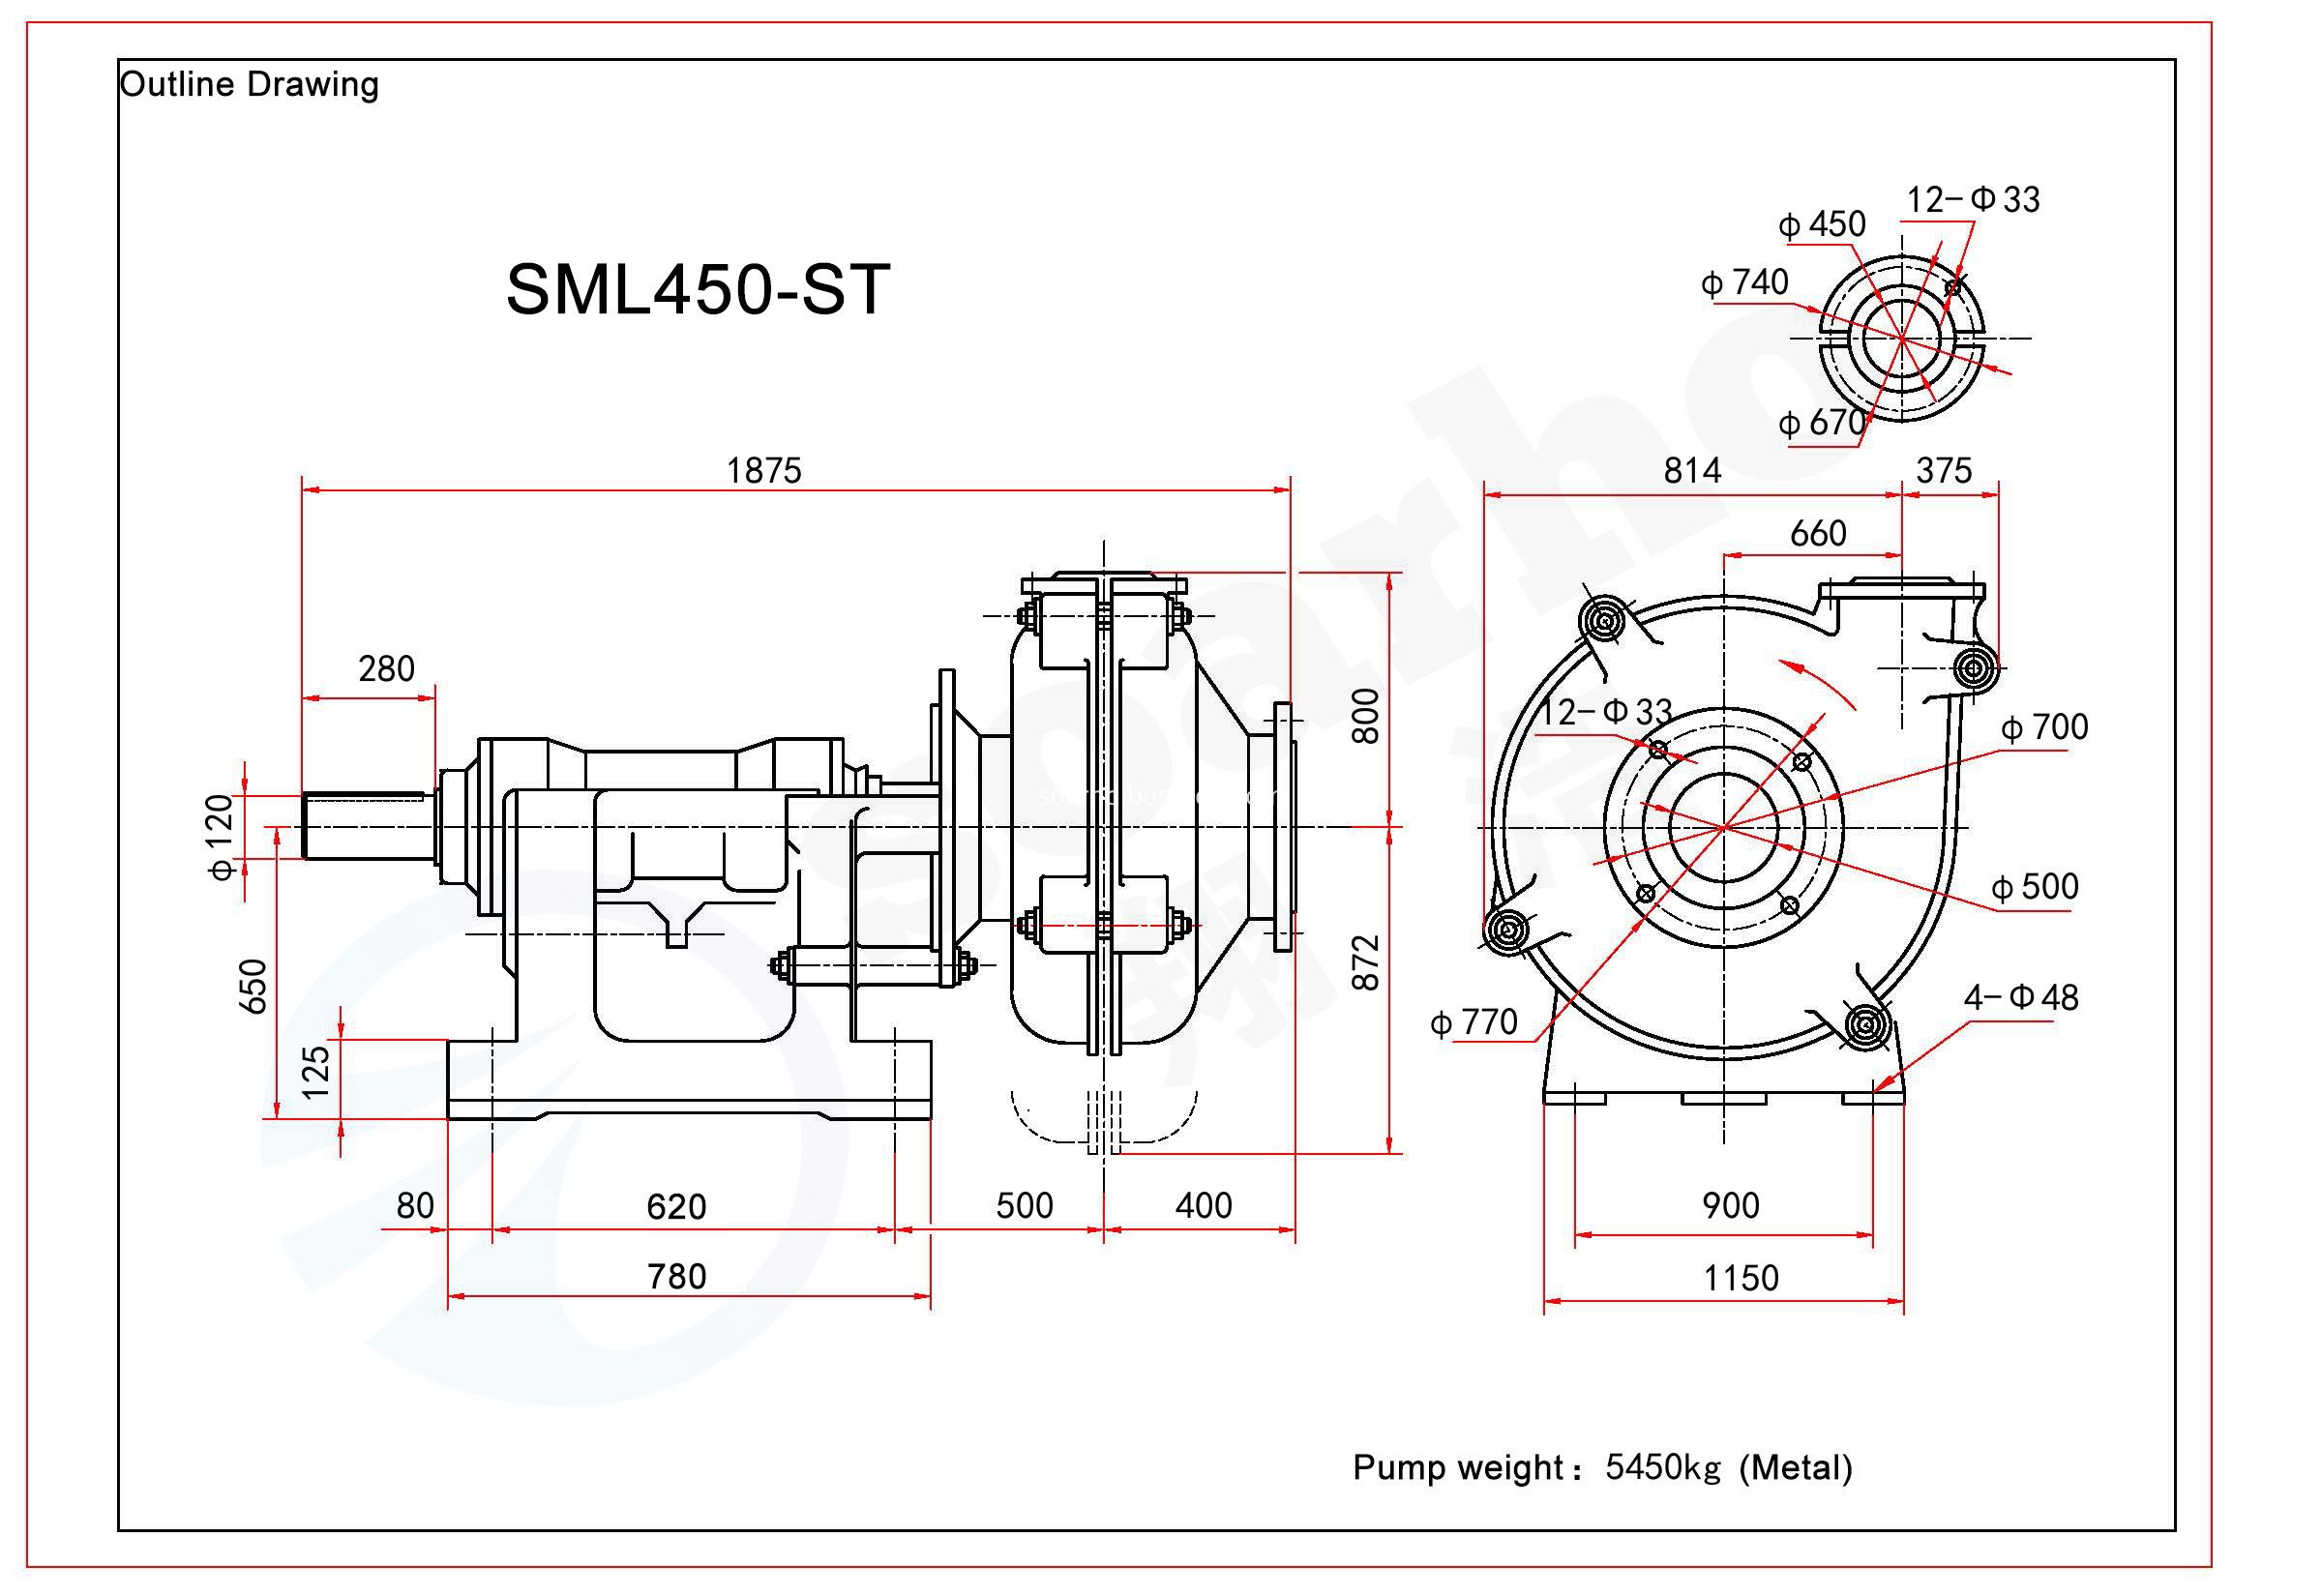 SML450-ST outline drawing